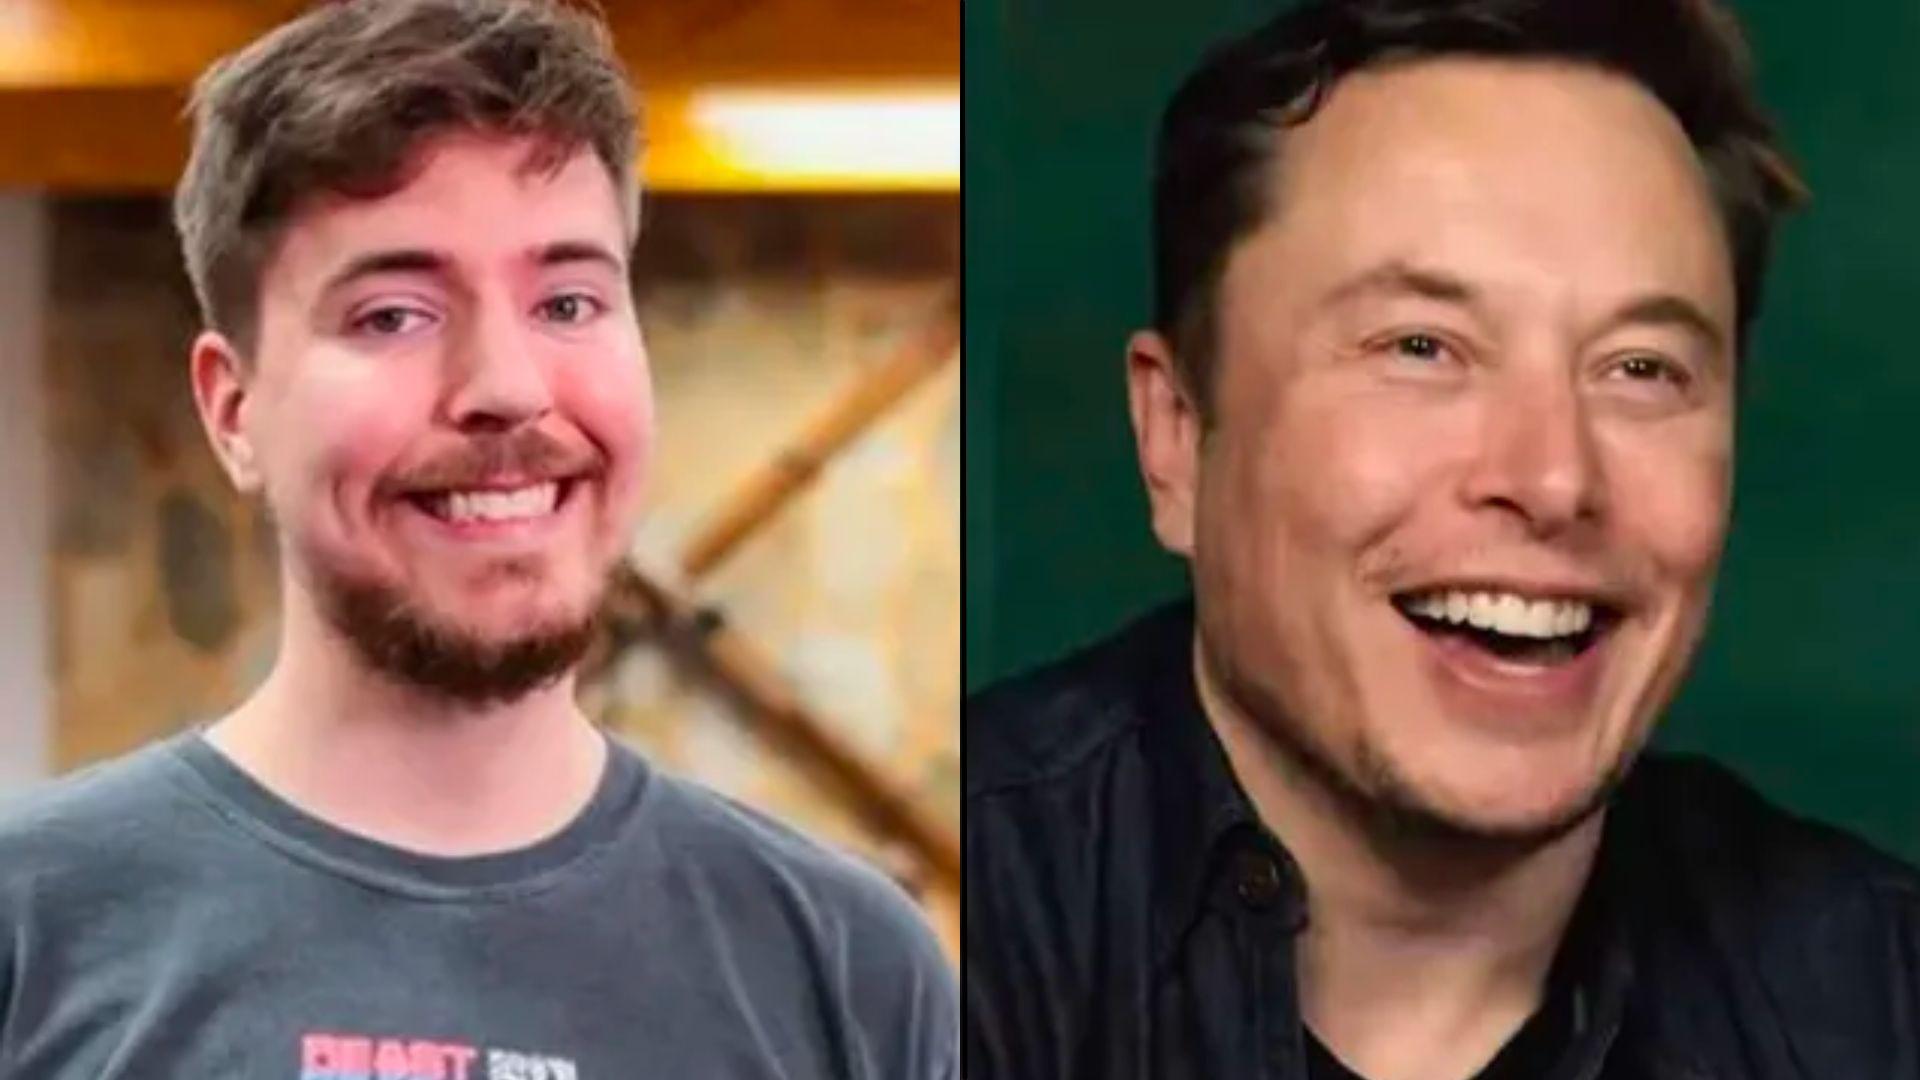 MrBeast and Elon Musk side-by-side smiling at camera